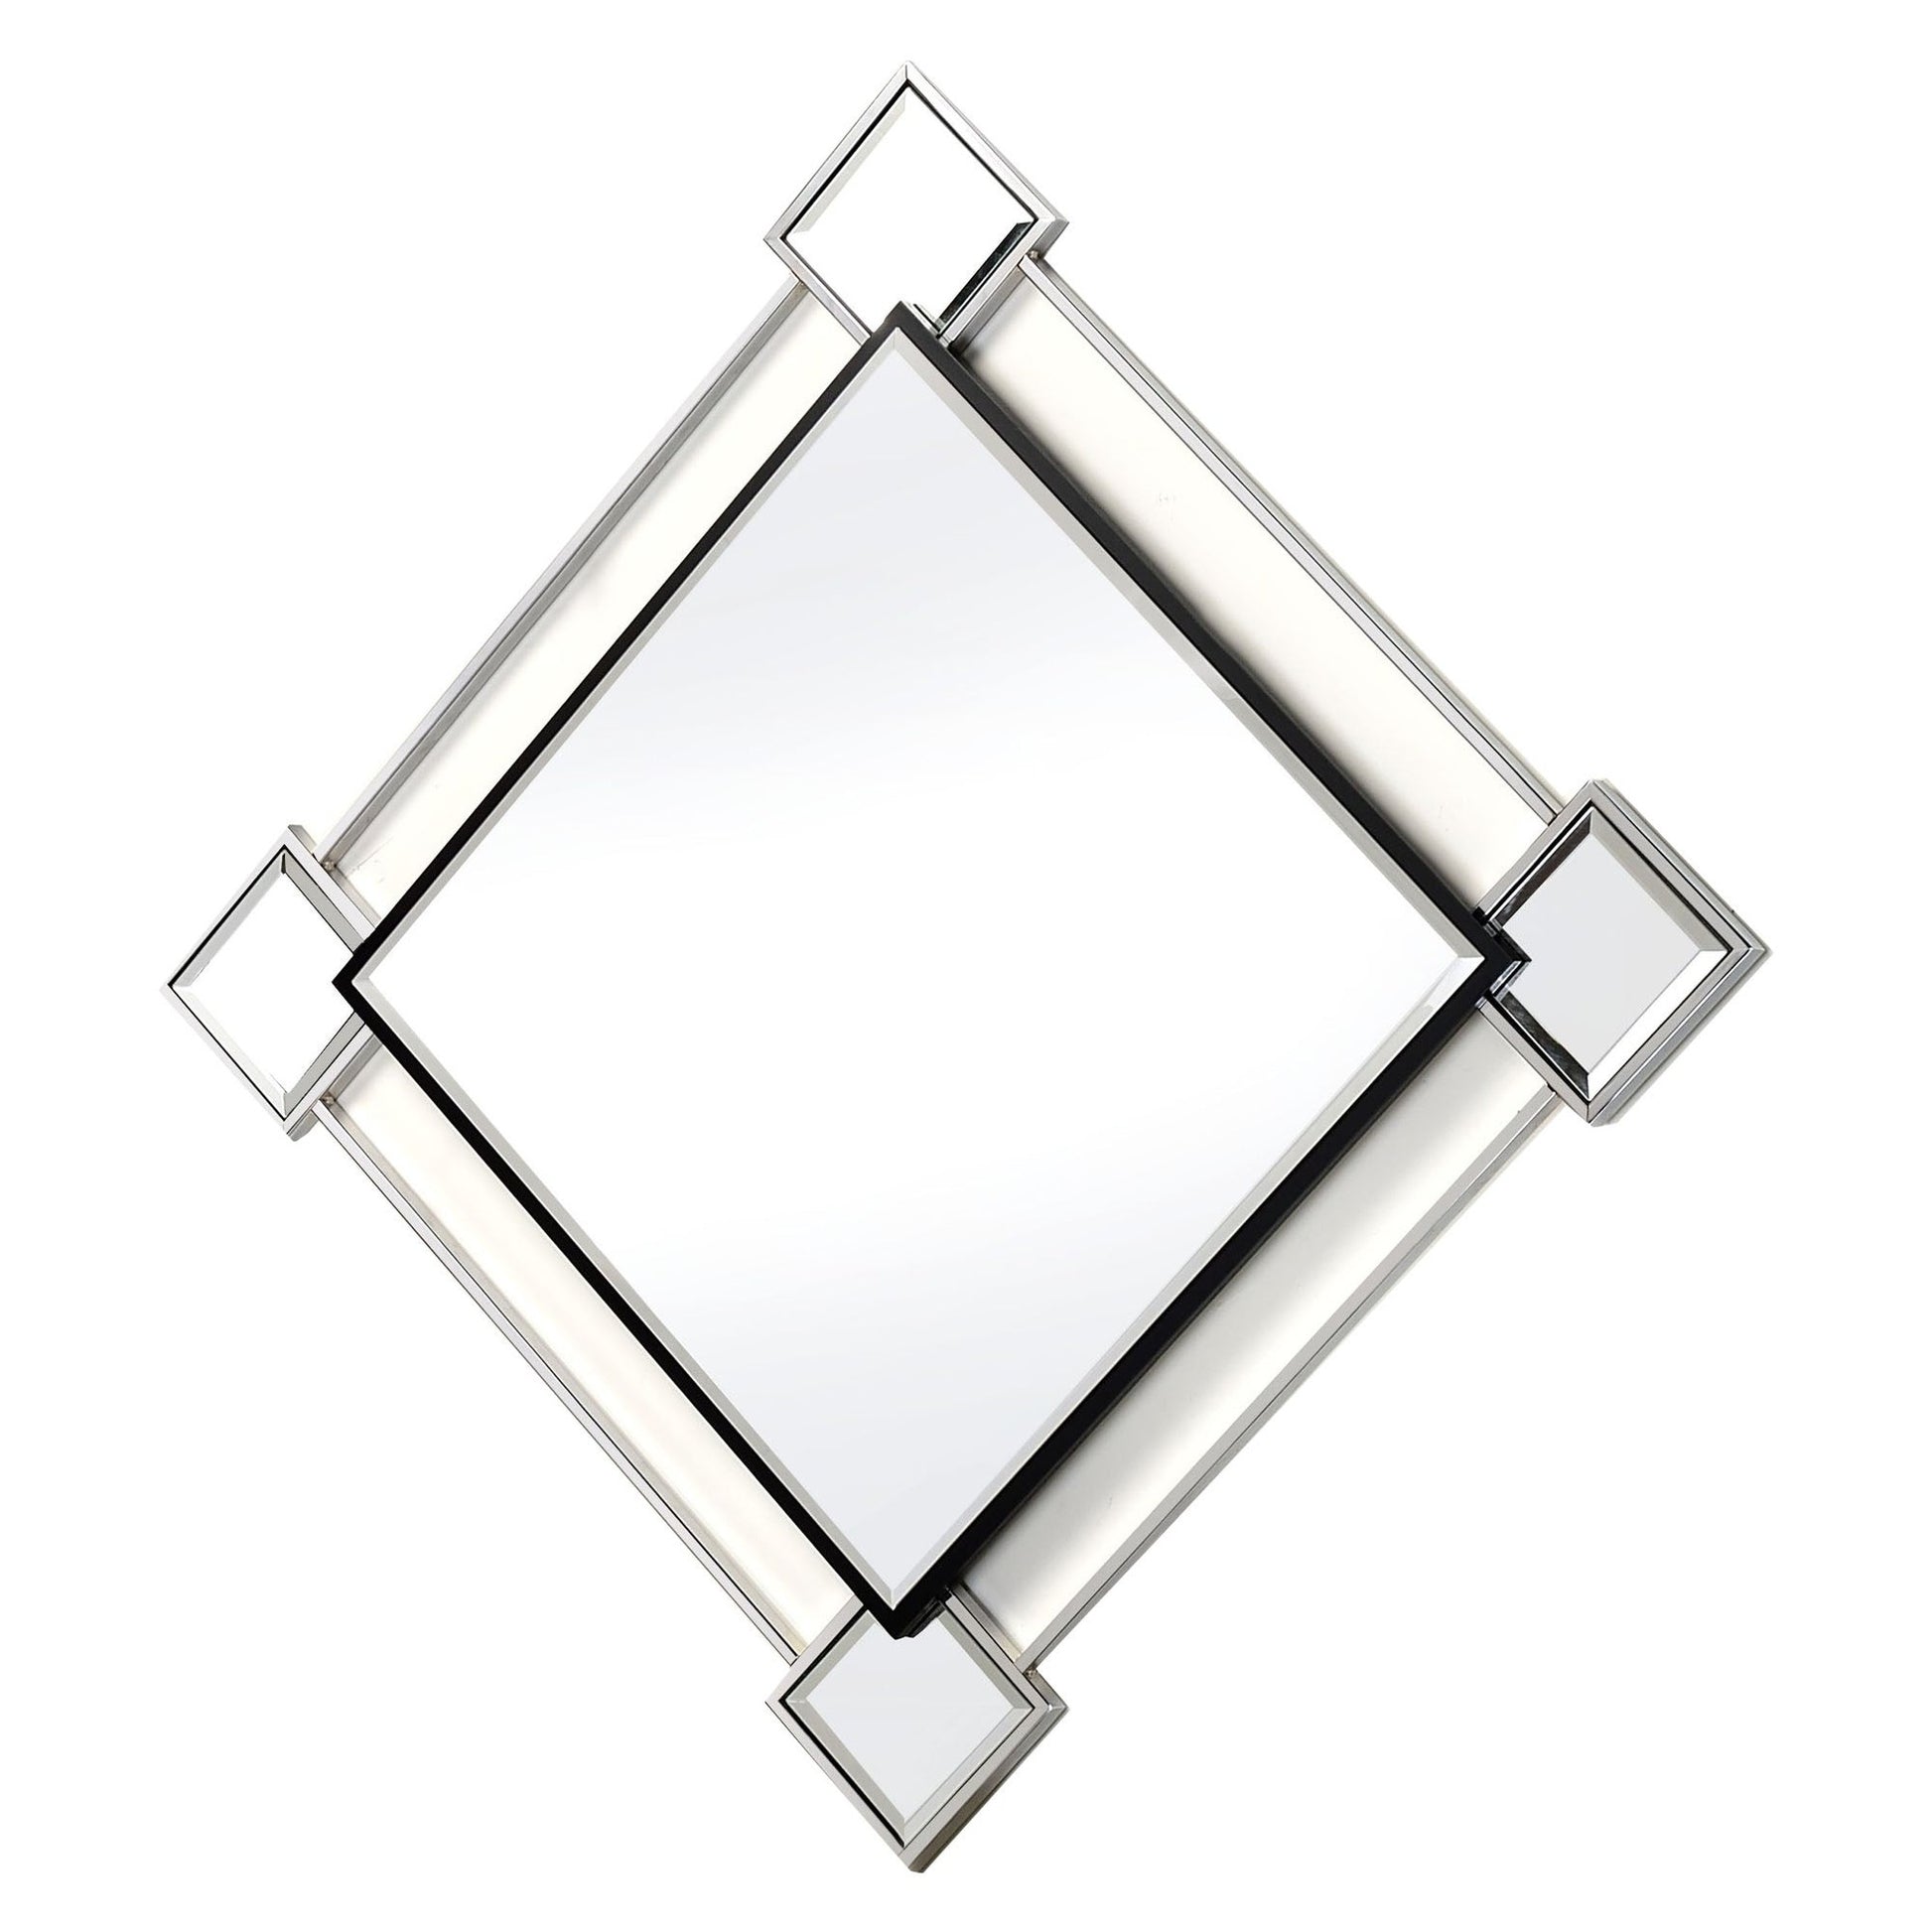 Benzara Silver Diamond Shaped Beveled Accent Wall Mirror With Mirror Inserts